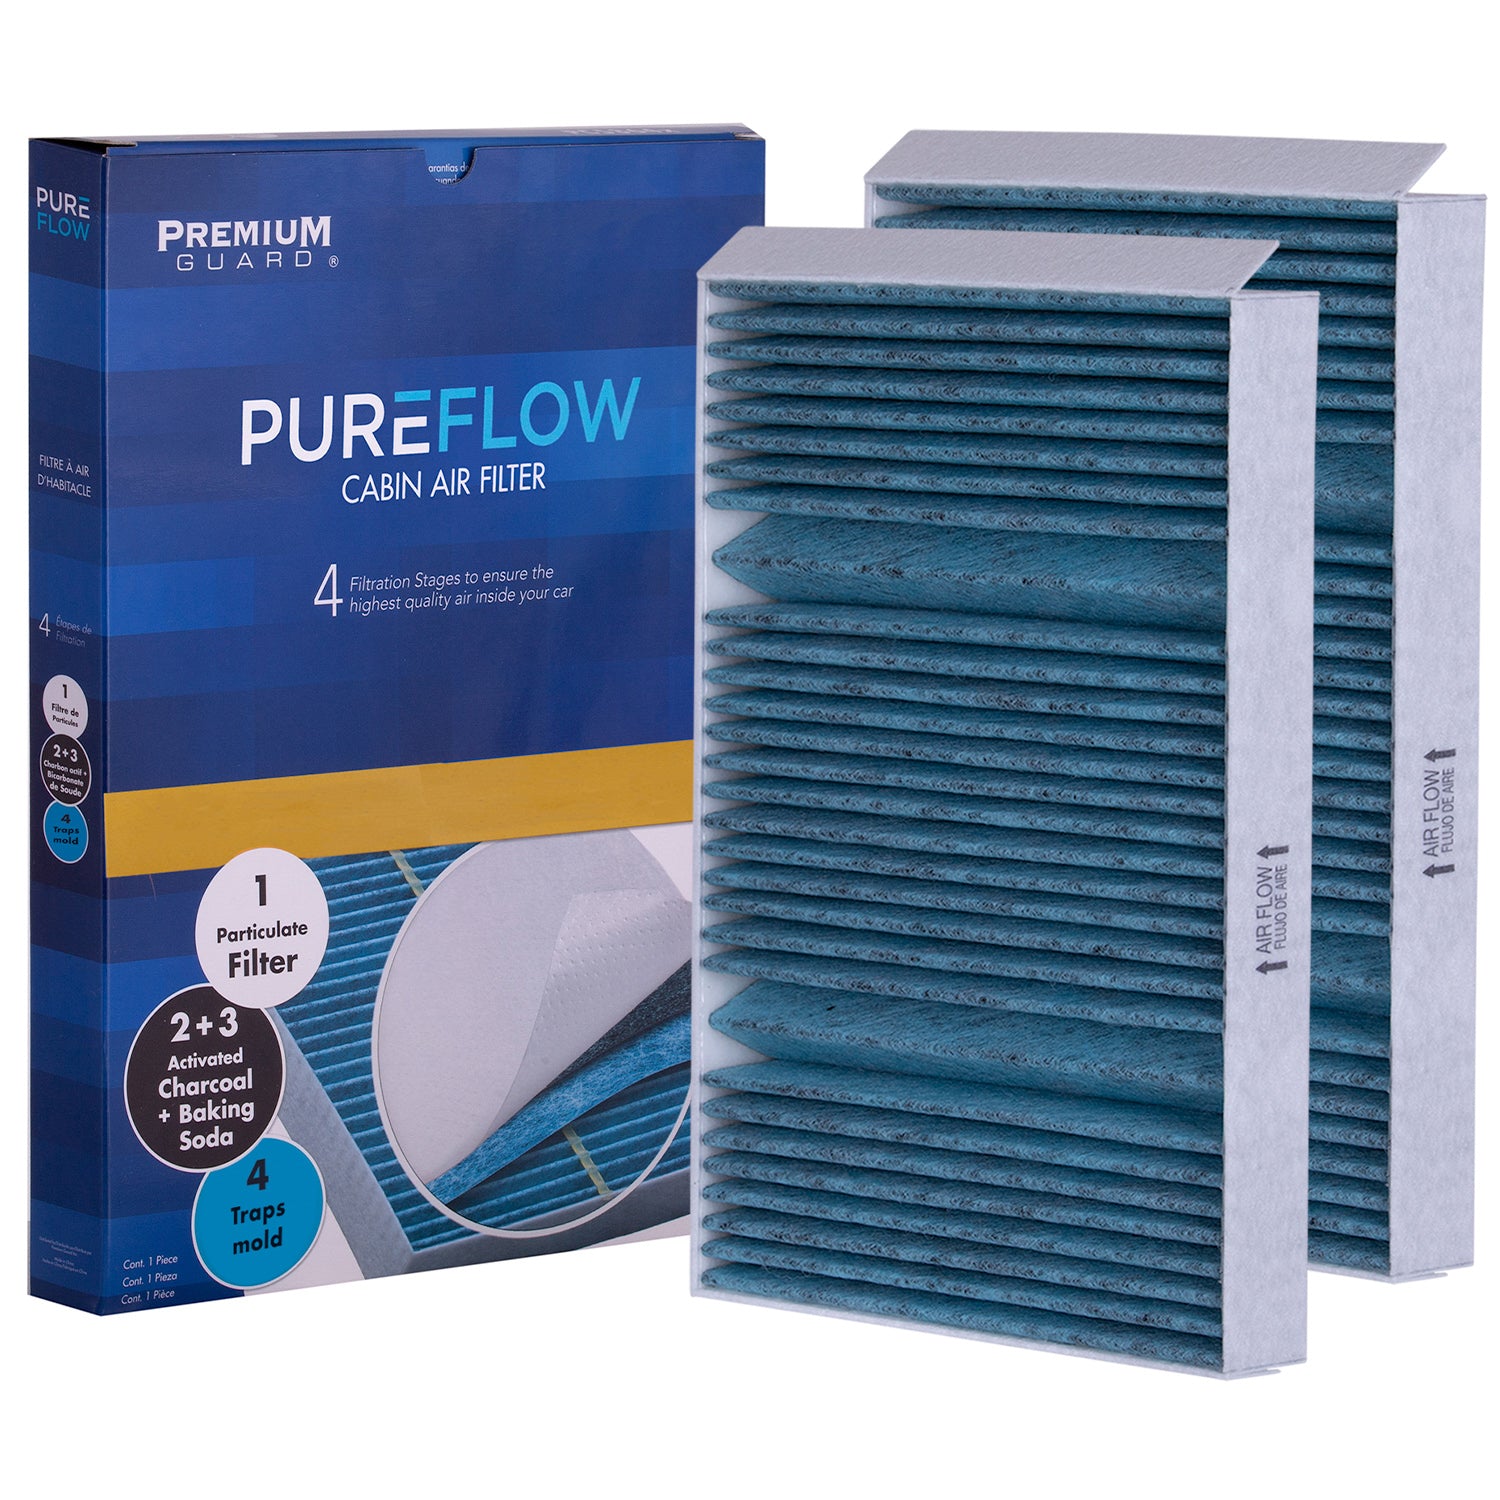 PUREFLOW 2015 Mercedes-Benz S550 Cabin Air Filter with Antibacterial Technology, PC99298X